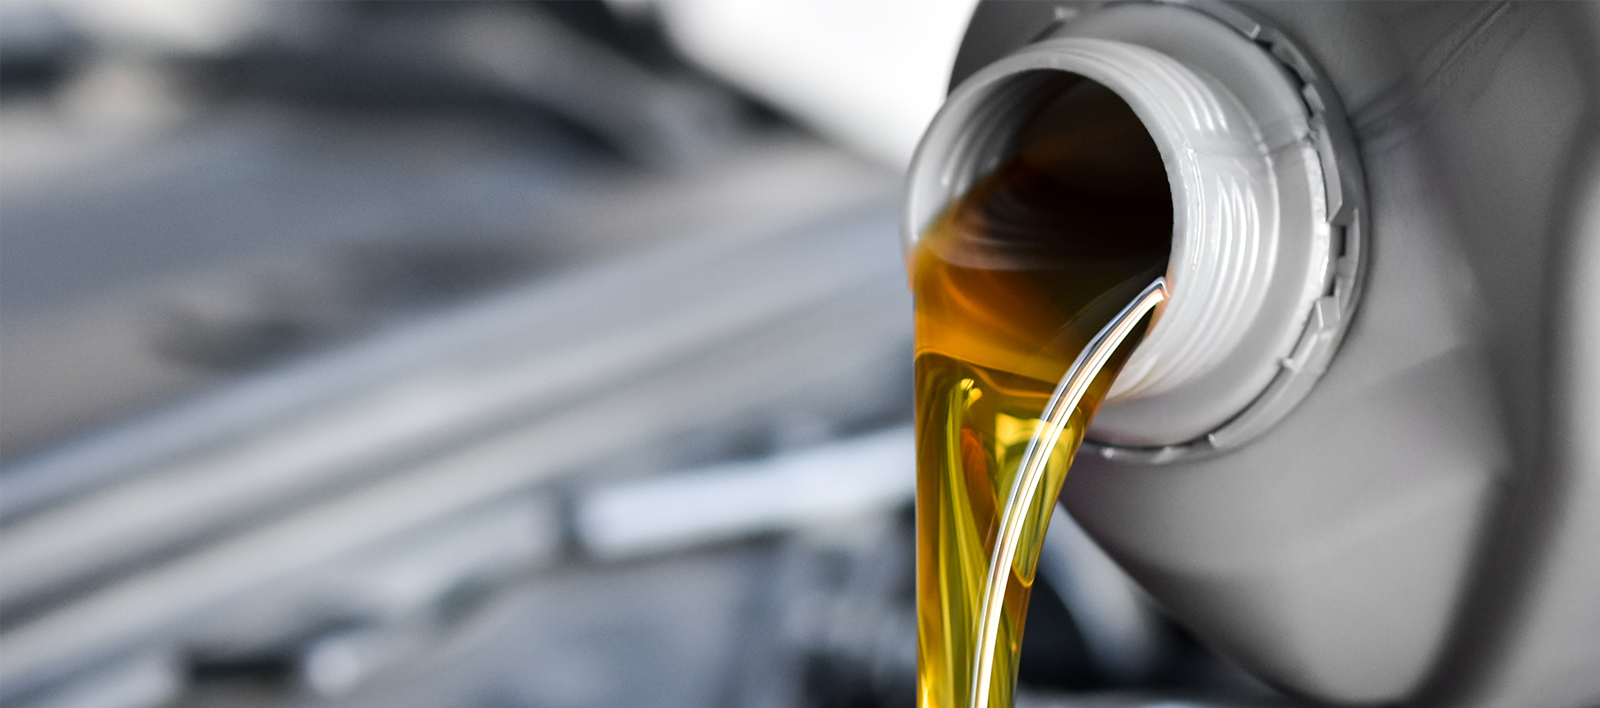 Image 6 Types of Car Fluids You Need to Maintain